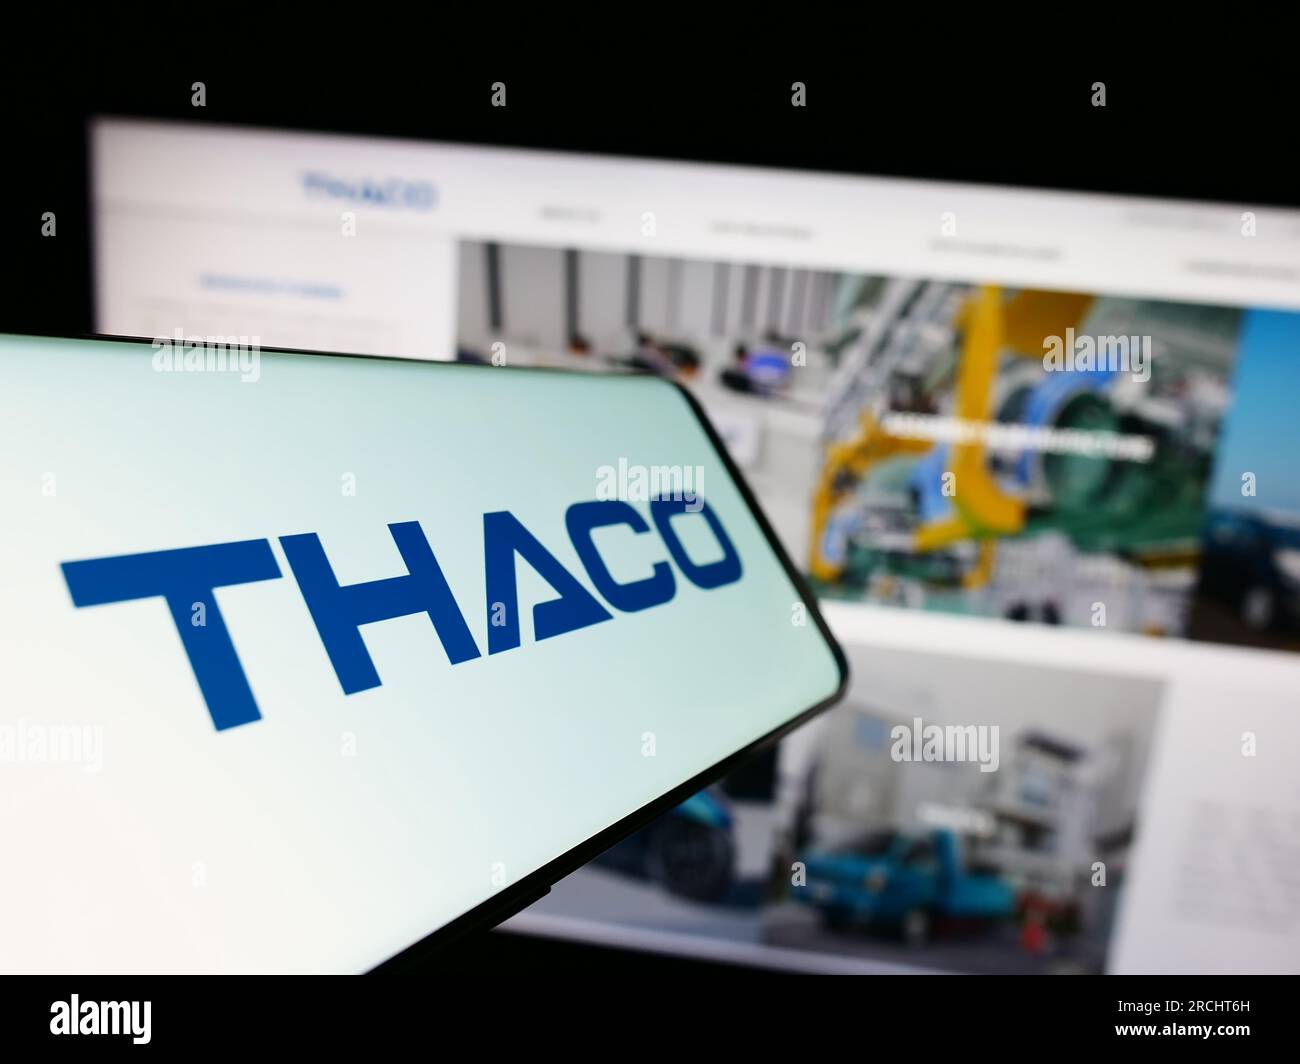 Smartphone with logo of company Truong Hai Auto Corporation (THACO) on screen in front of website. Focus on center-left of phone display. Stock Photo